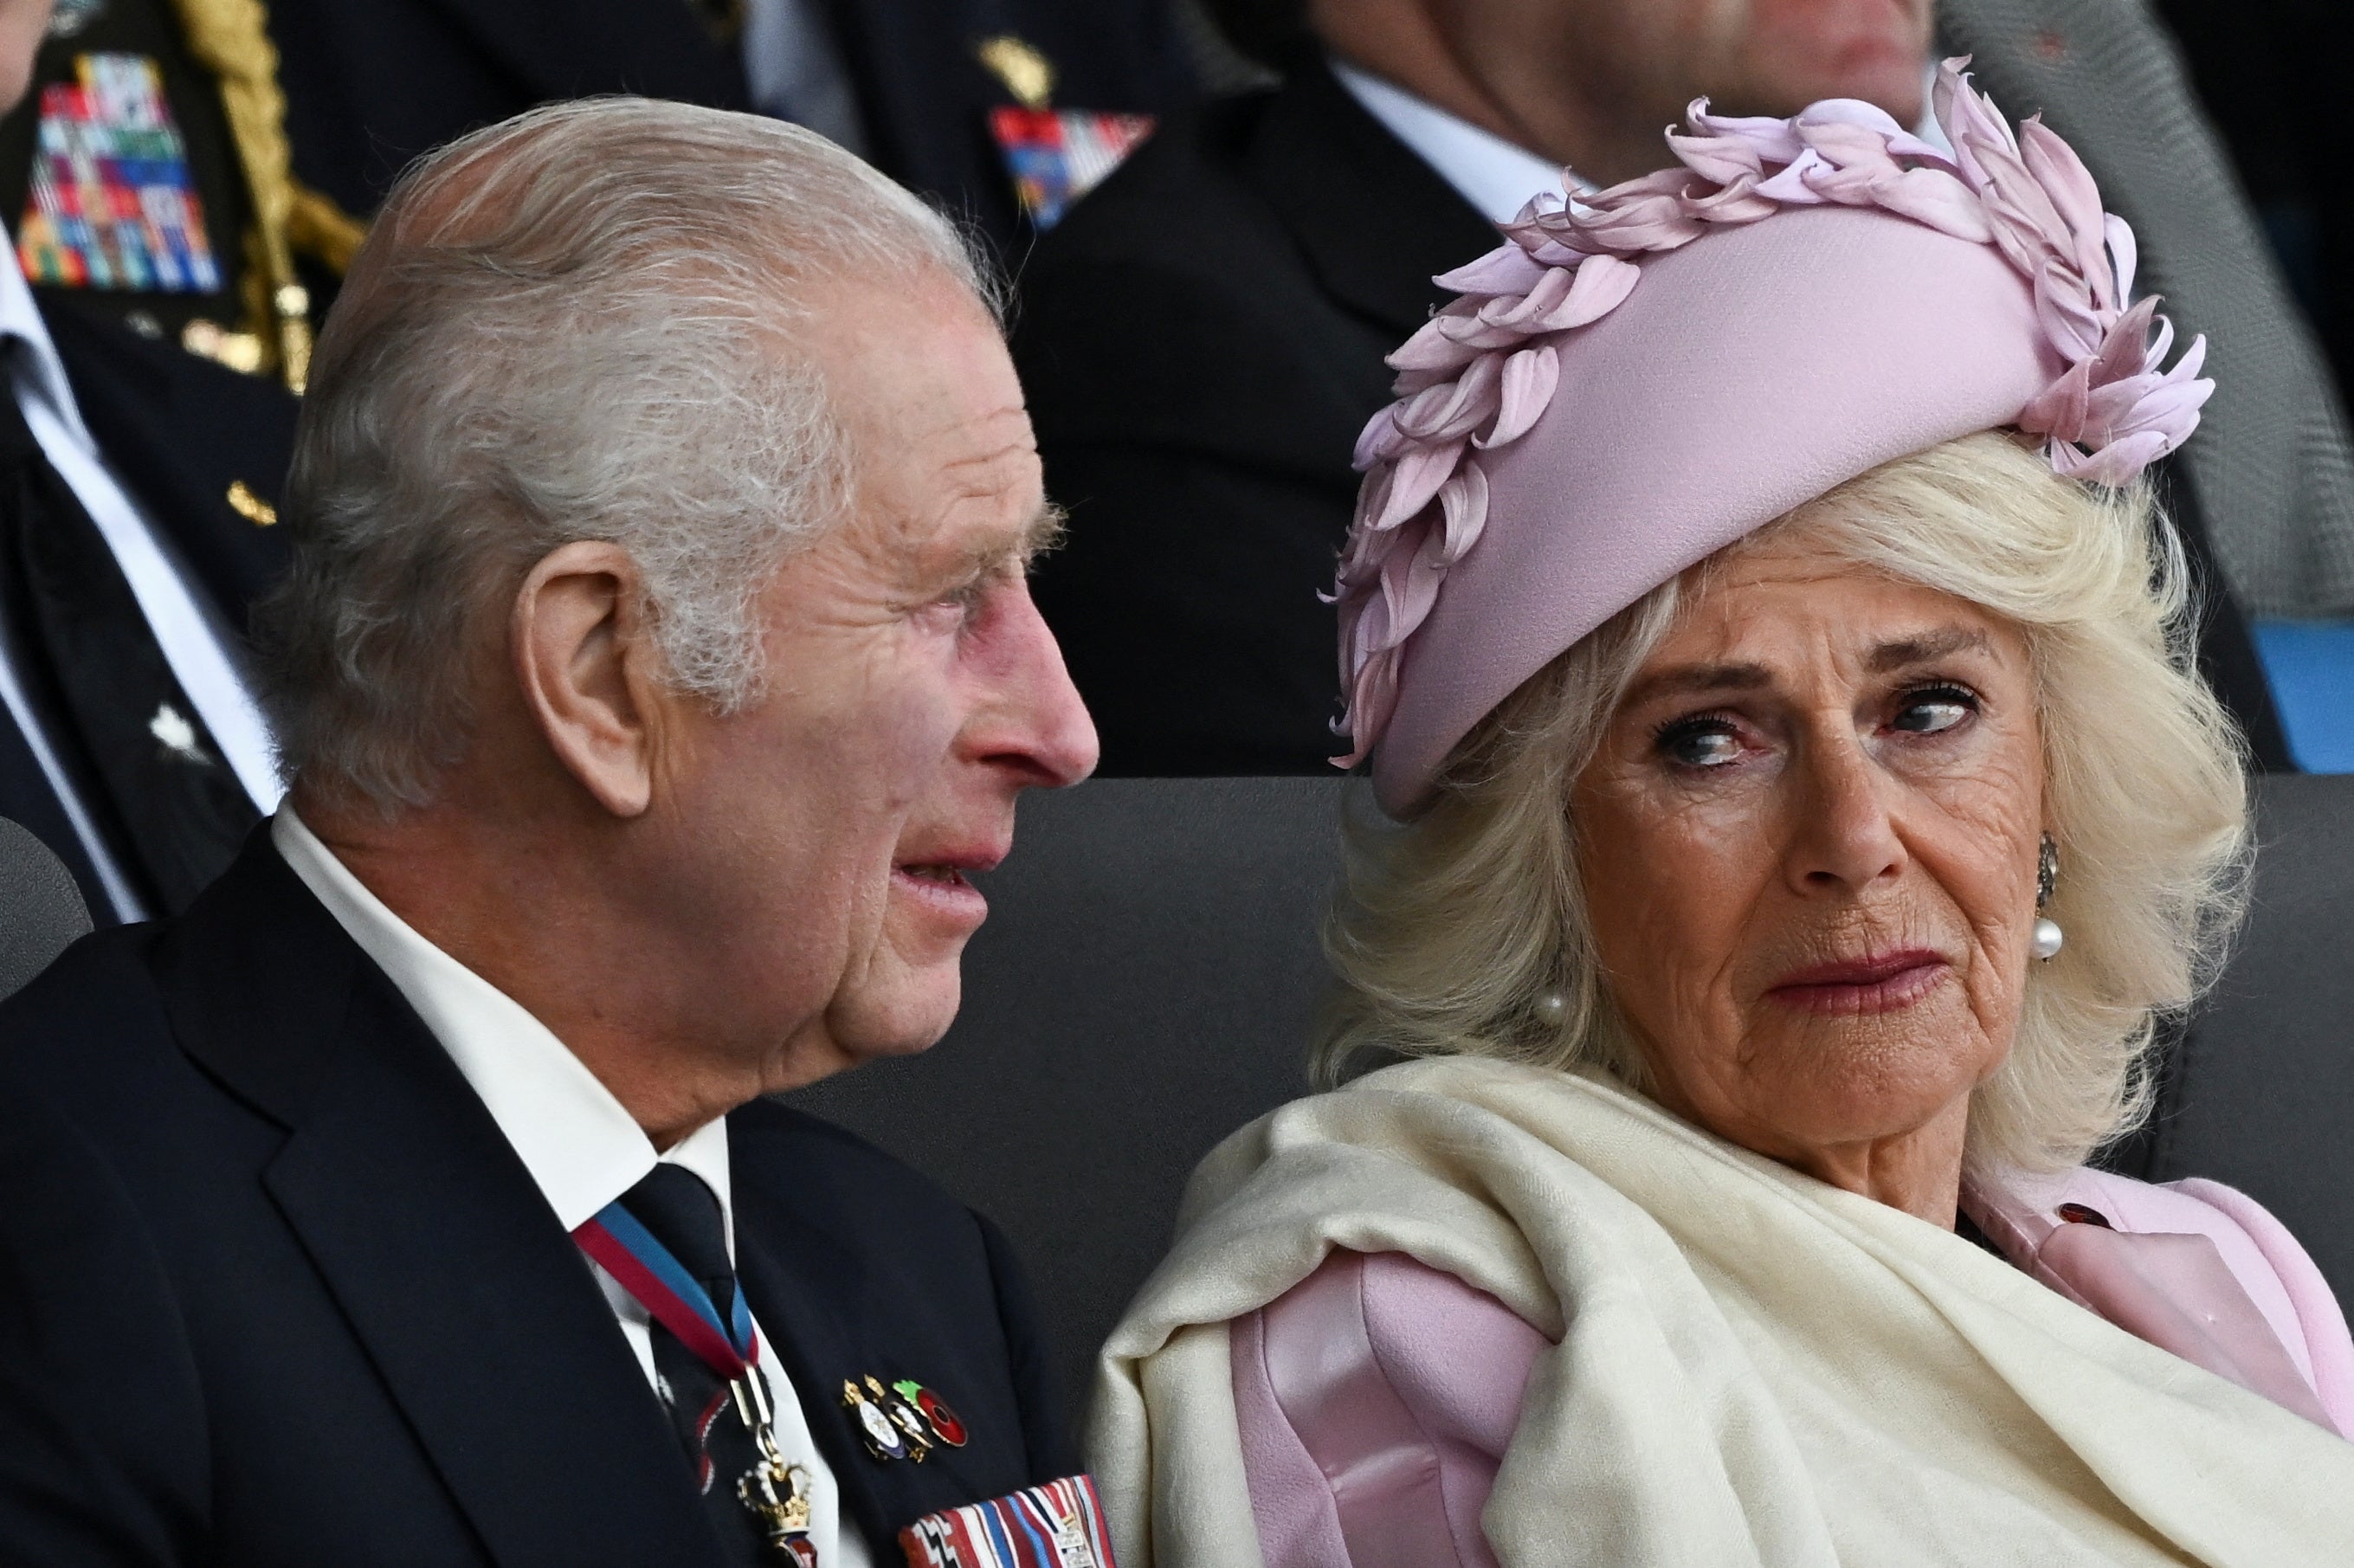 Camilla shed tears as she listened to a veteran’s story